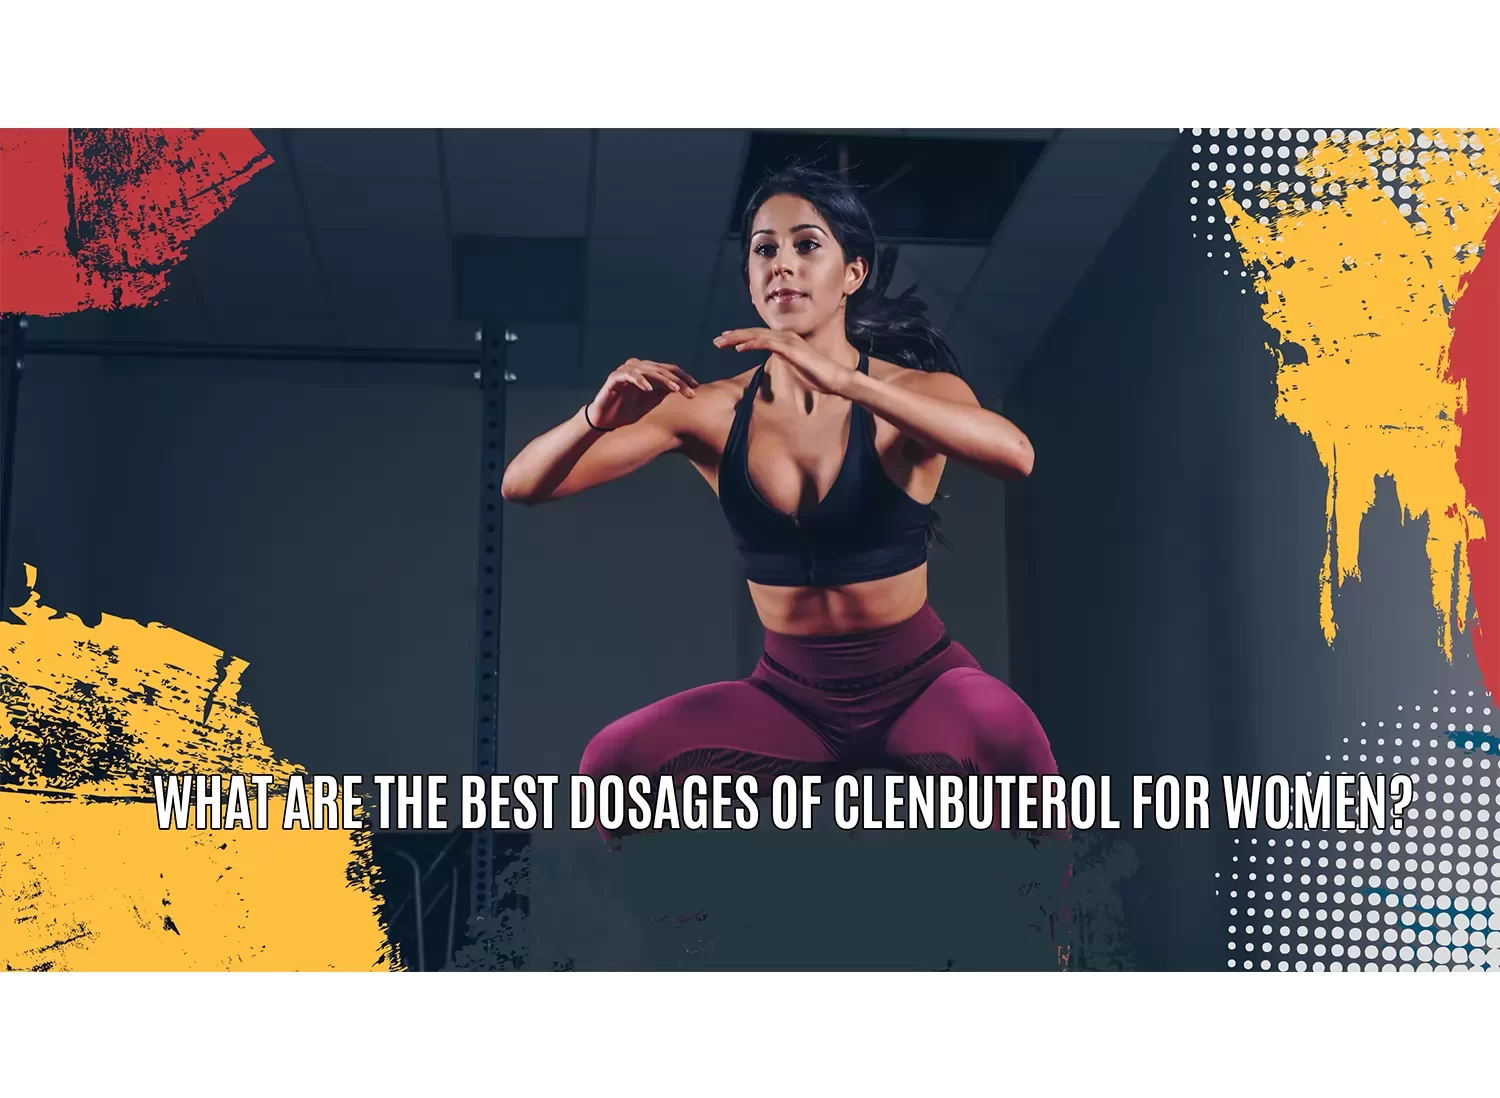 Dosages of Clenbuterol for women